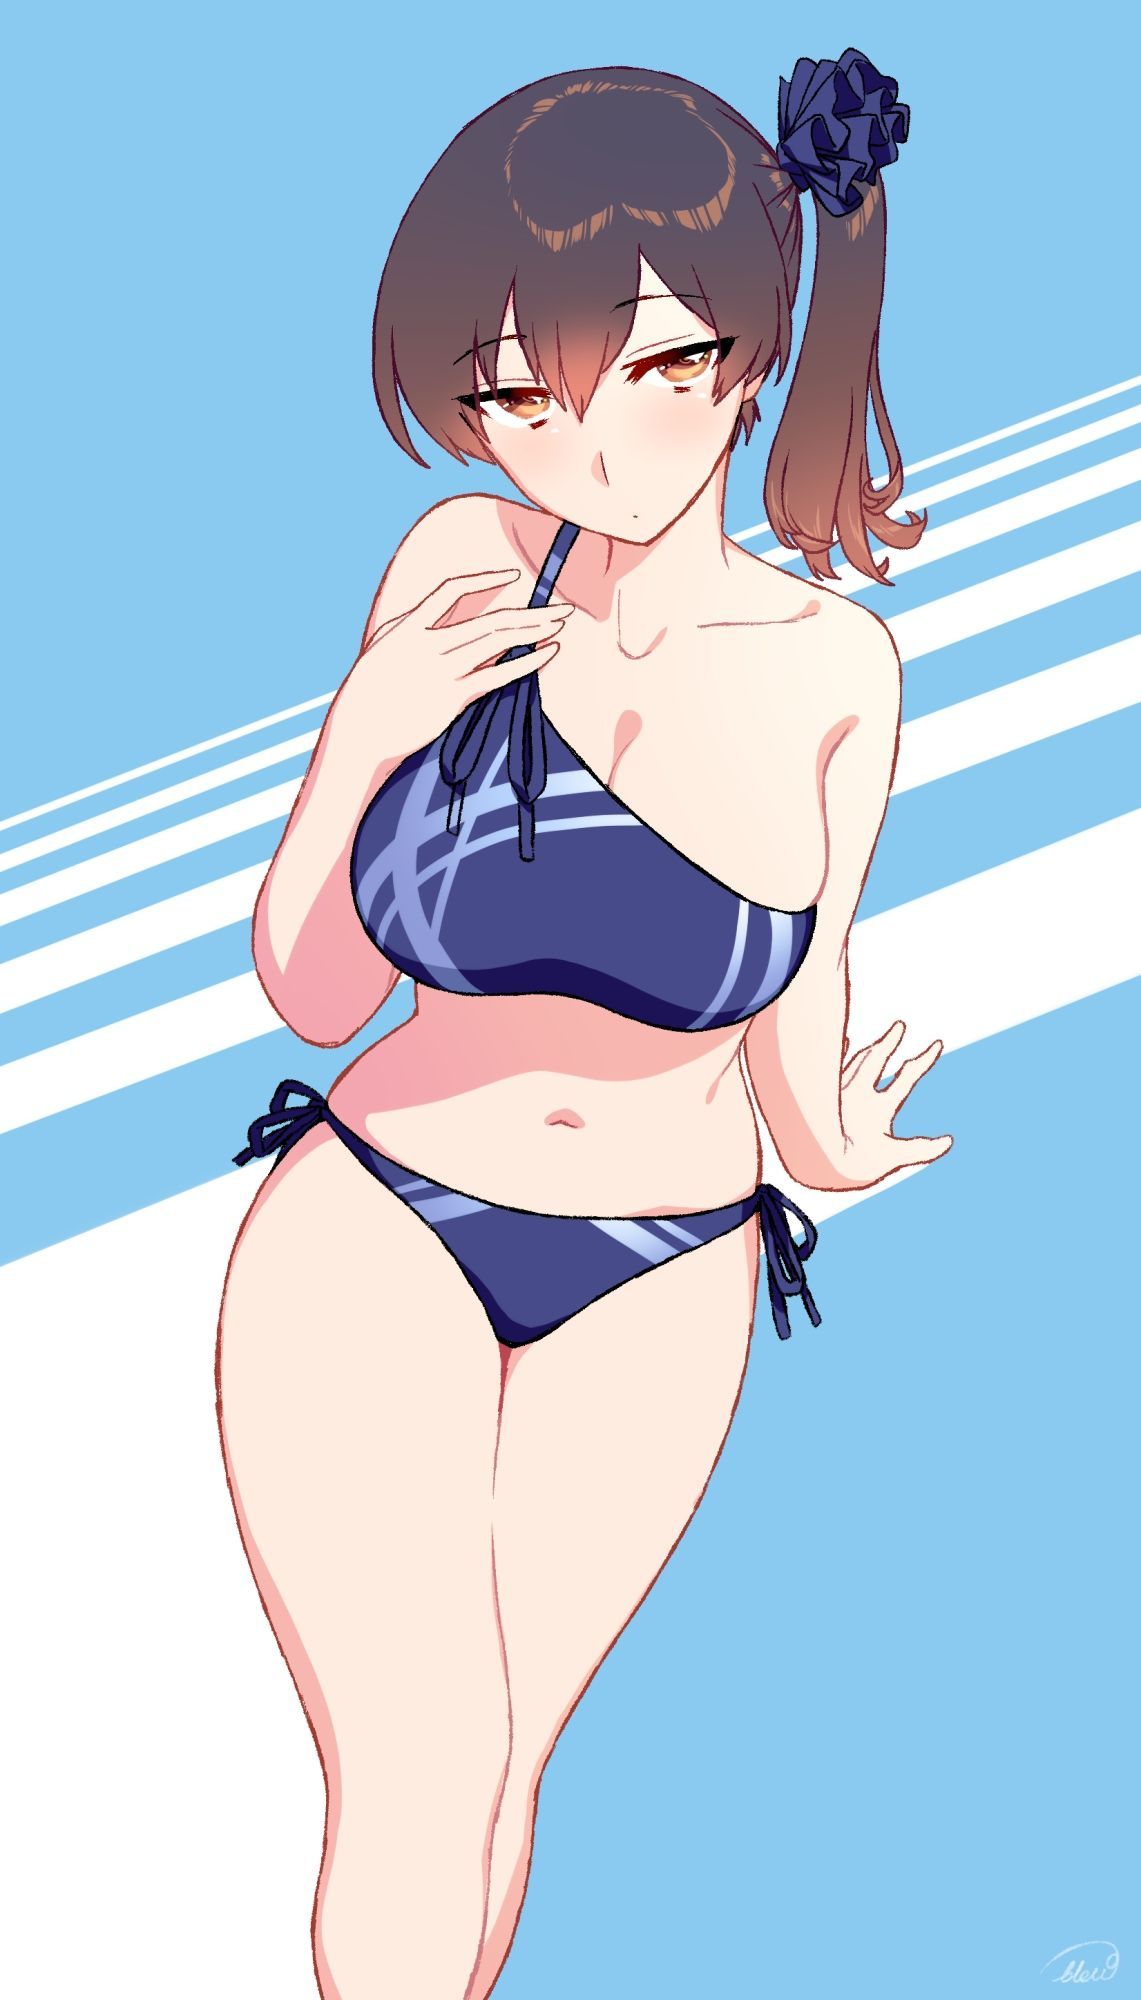 [Secondary/ZIP] beautiful girl image of a cute swimsuit in etch 2